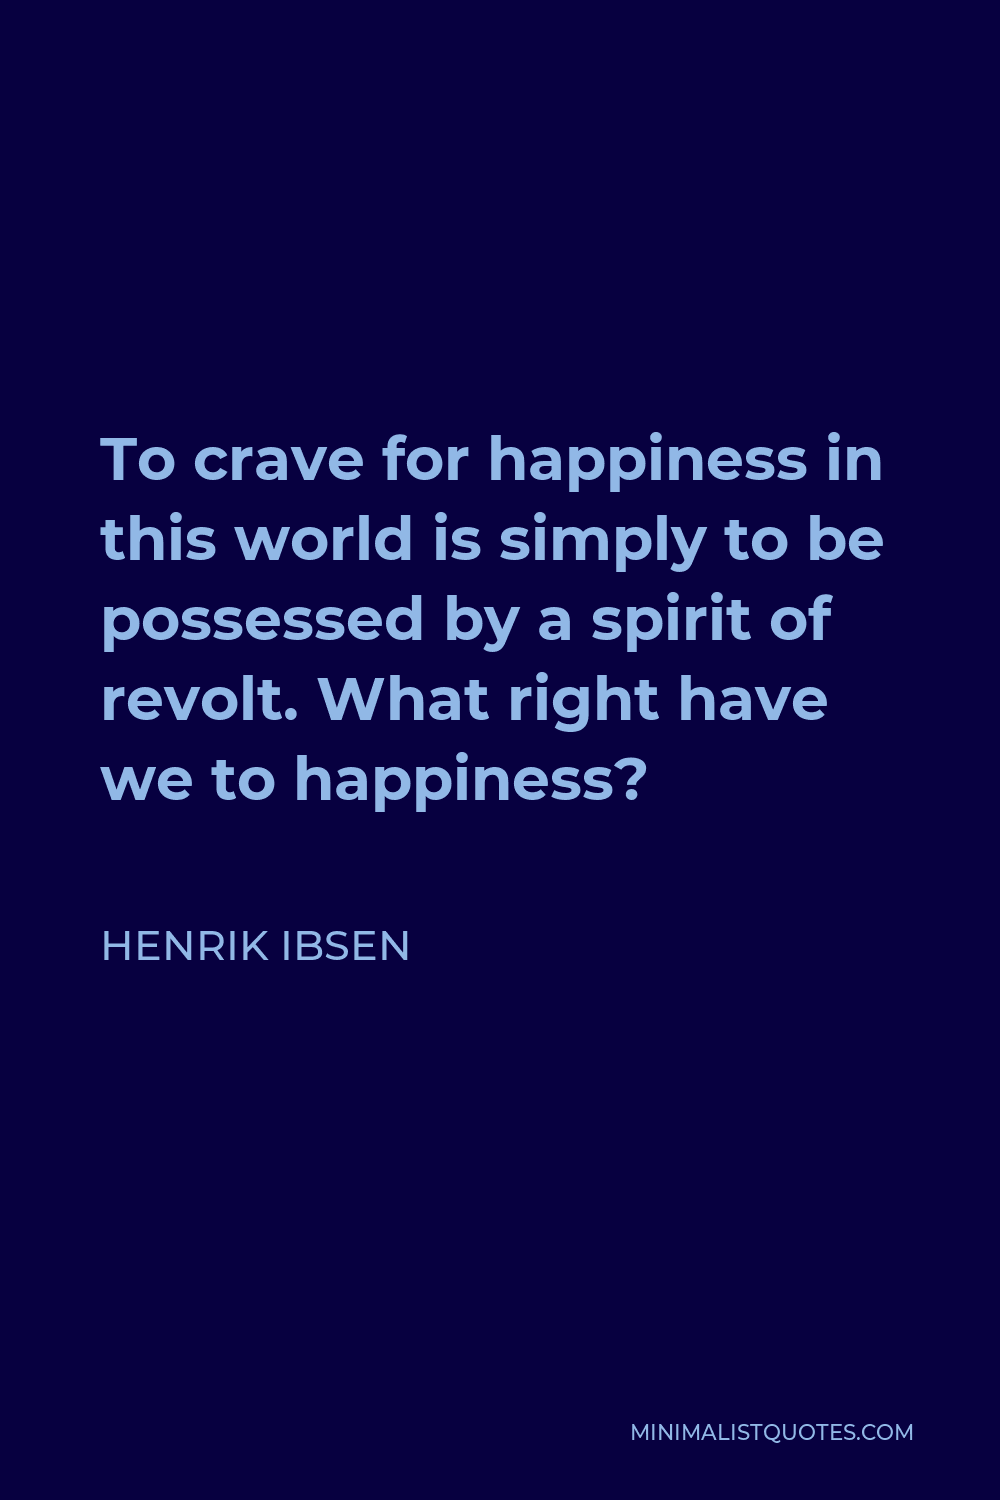 Henrik Ibsen Quote - To crave for happiness in this world is simply to be possessed by a spirit of revolt. What right have we to happiness?